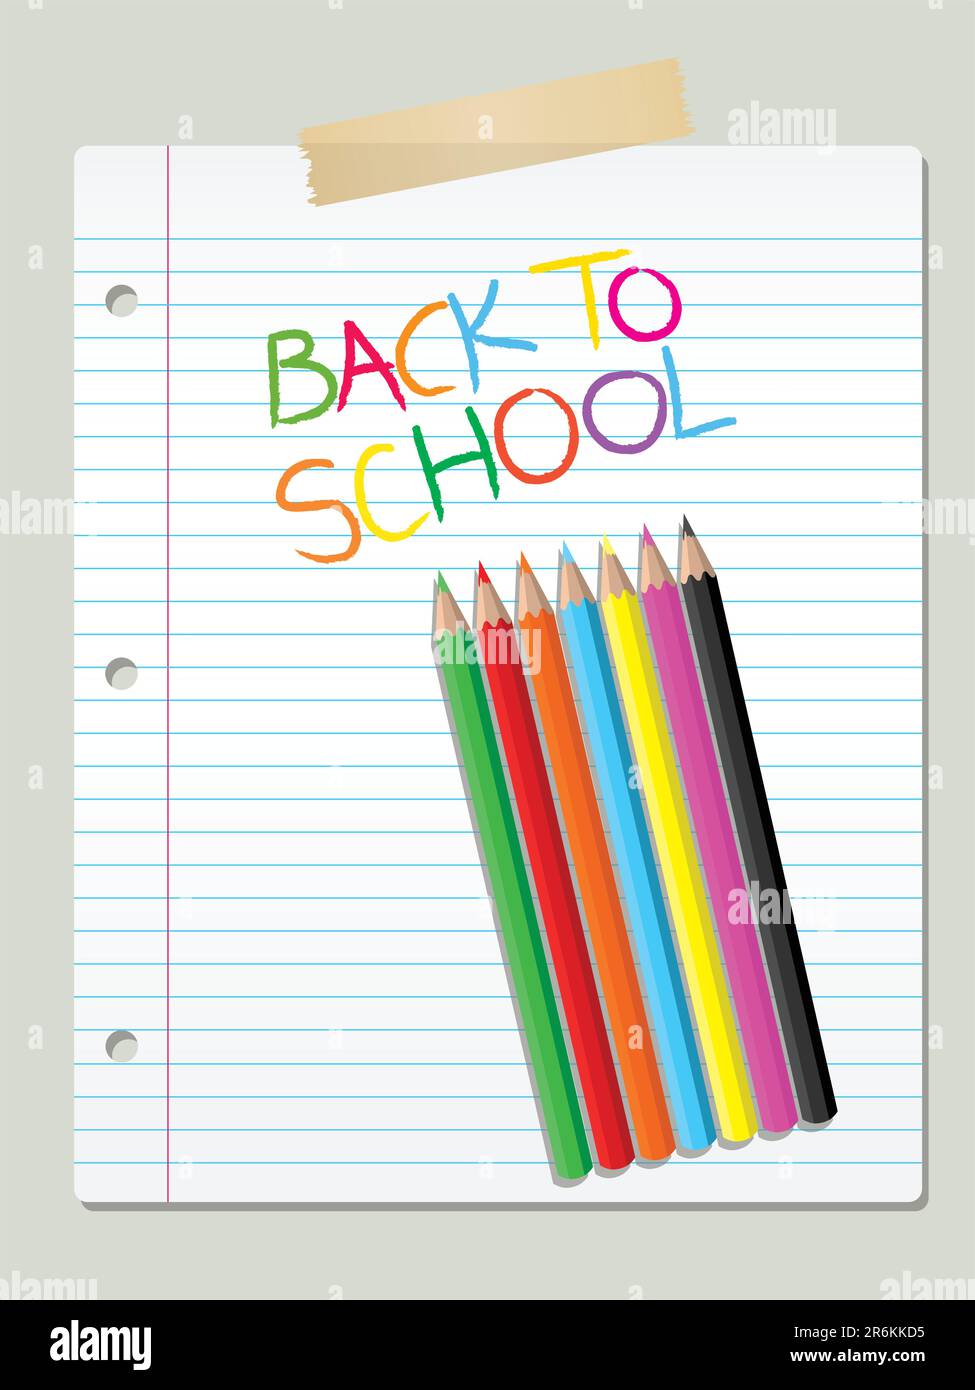 Coloured pencils on lined paper Stock Vector